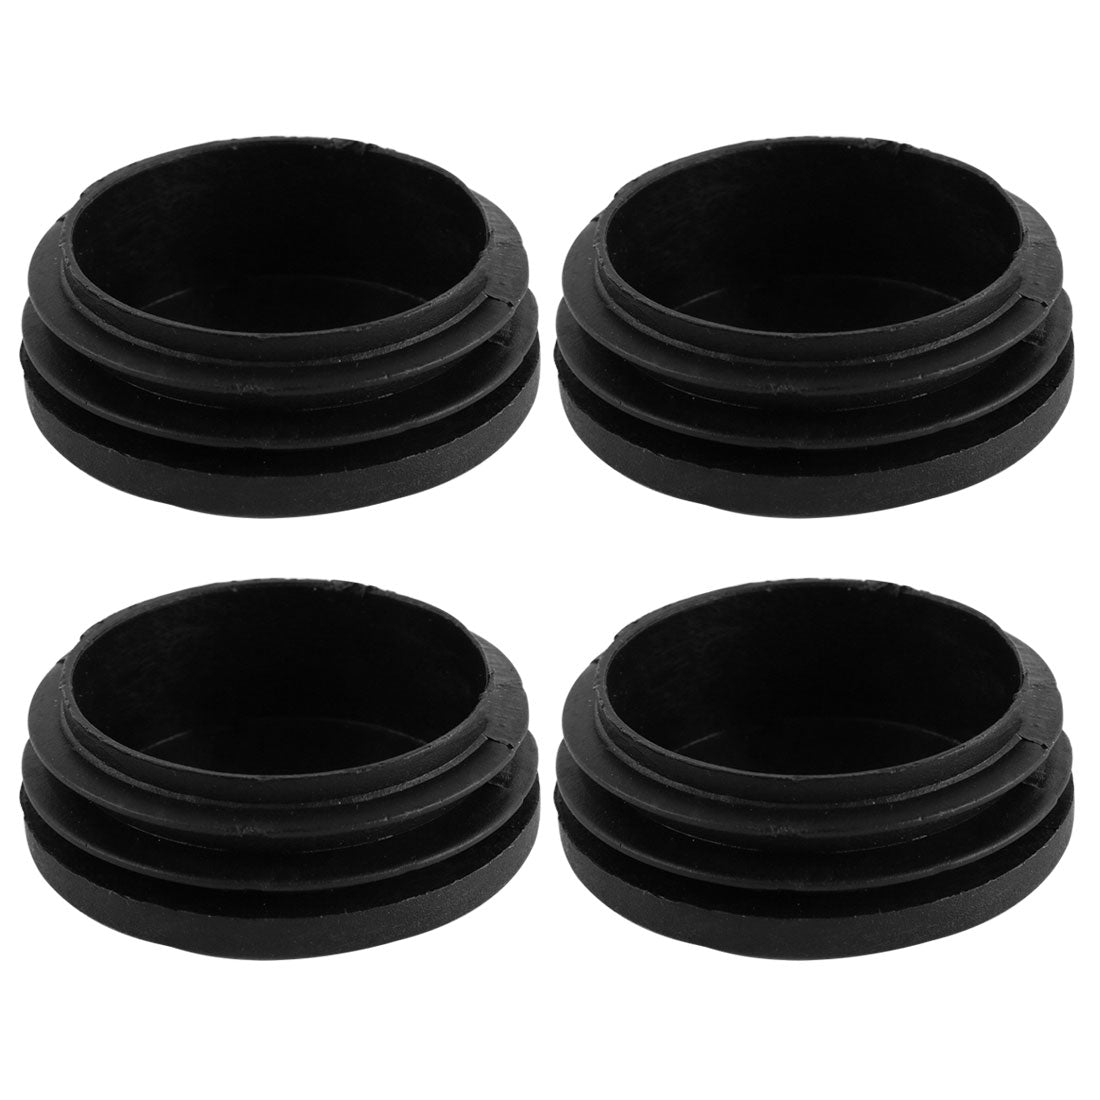 uxcell Uxcell 2" 50mm OD Plastic Round Ribbed Tube Inserts Pipe End Cover Cap Black 4pcs, 1.85"-1.93" Inner Dia, Furniture Chair Table Feet Floor Protector